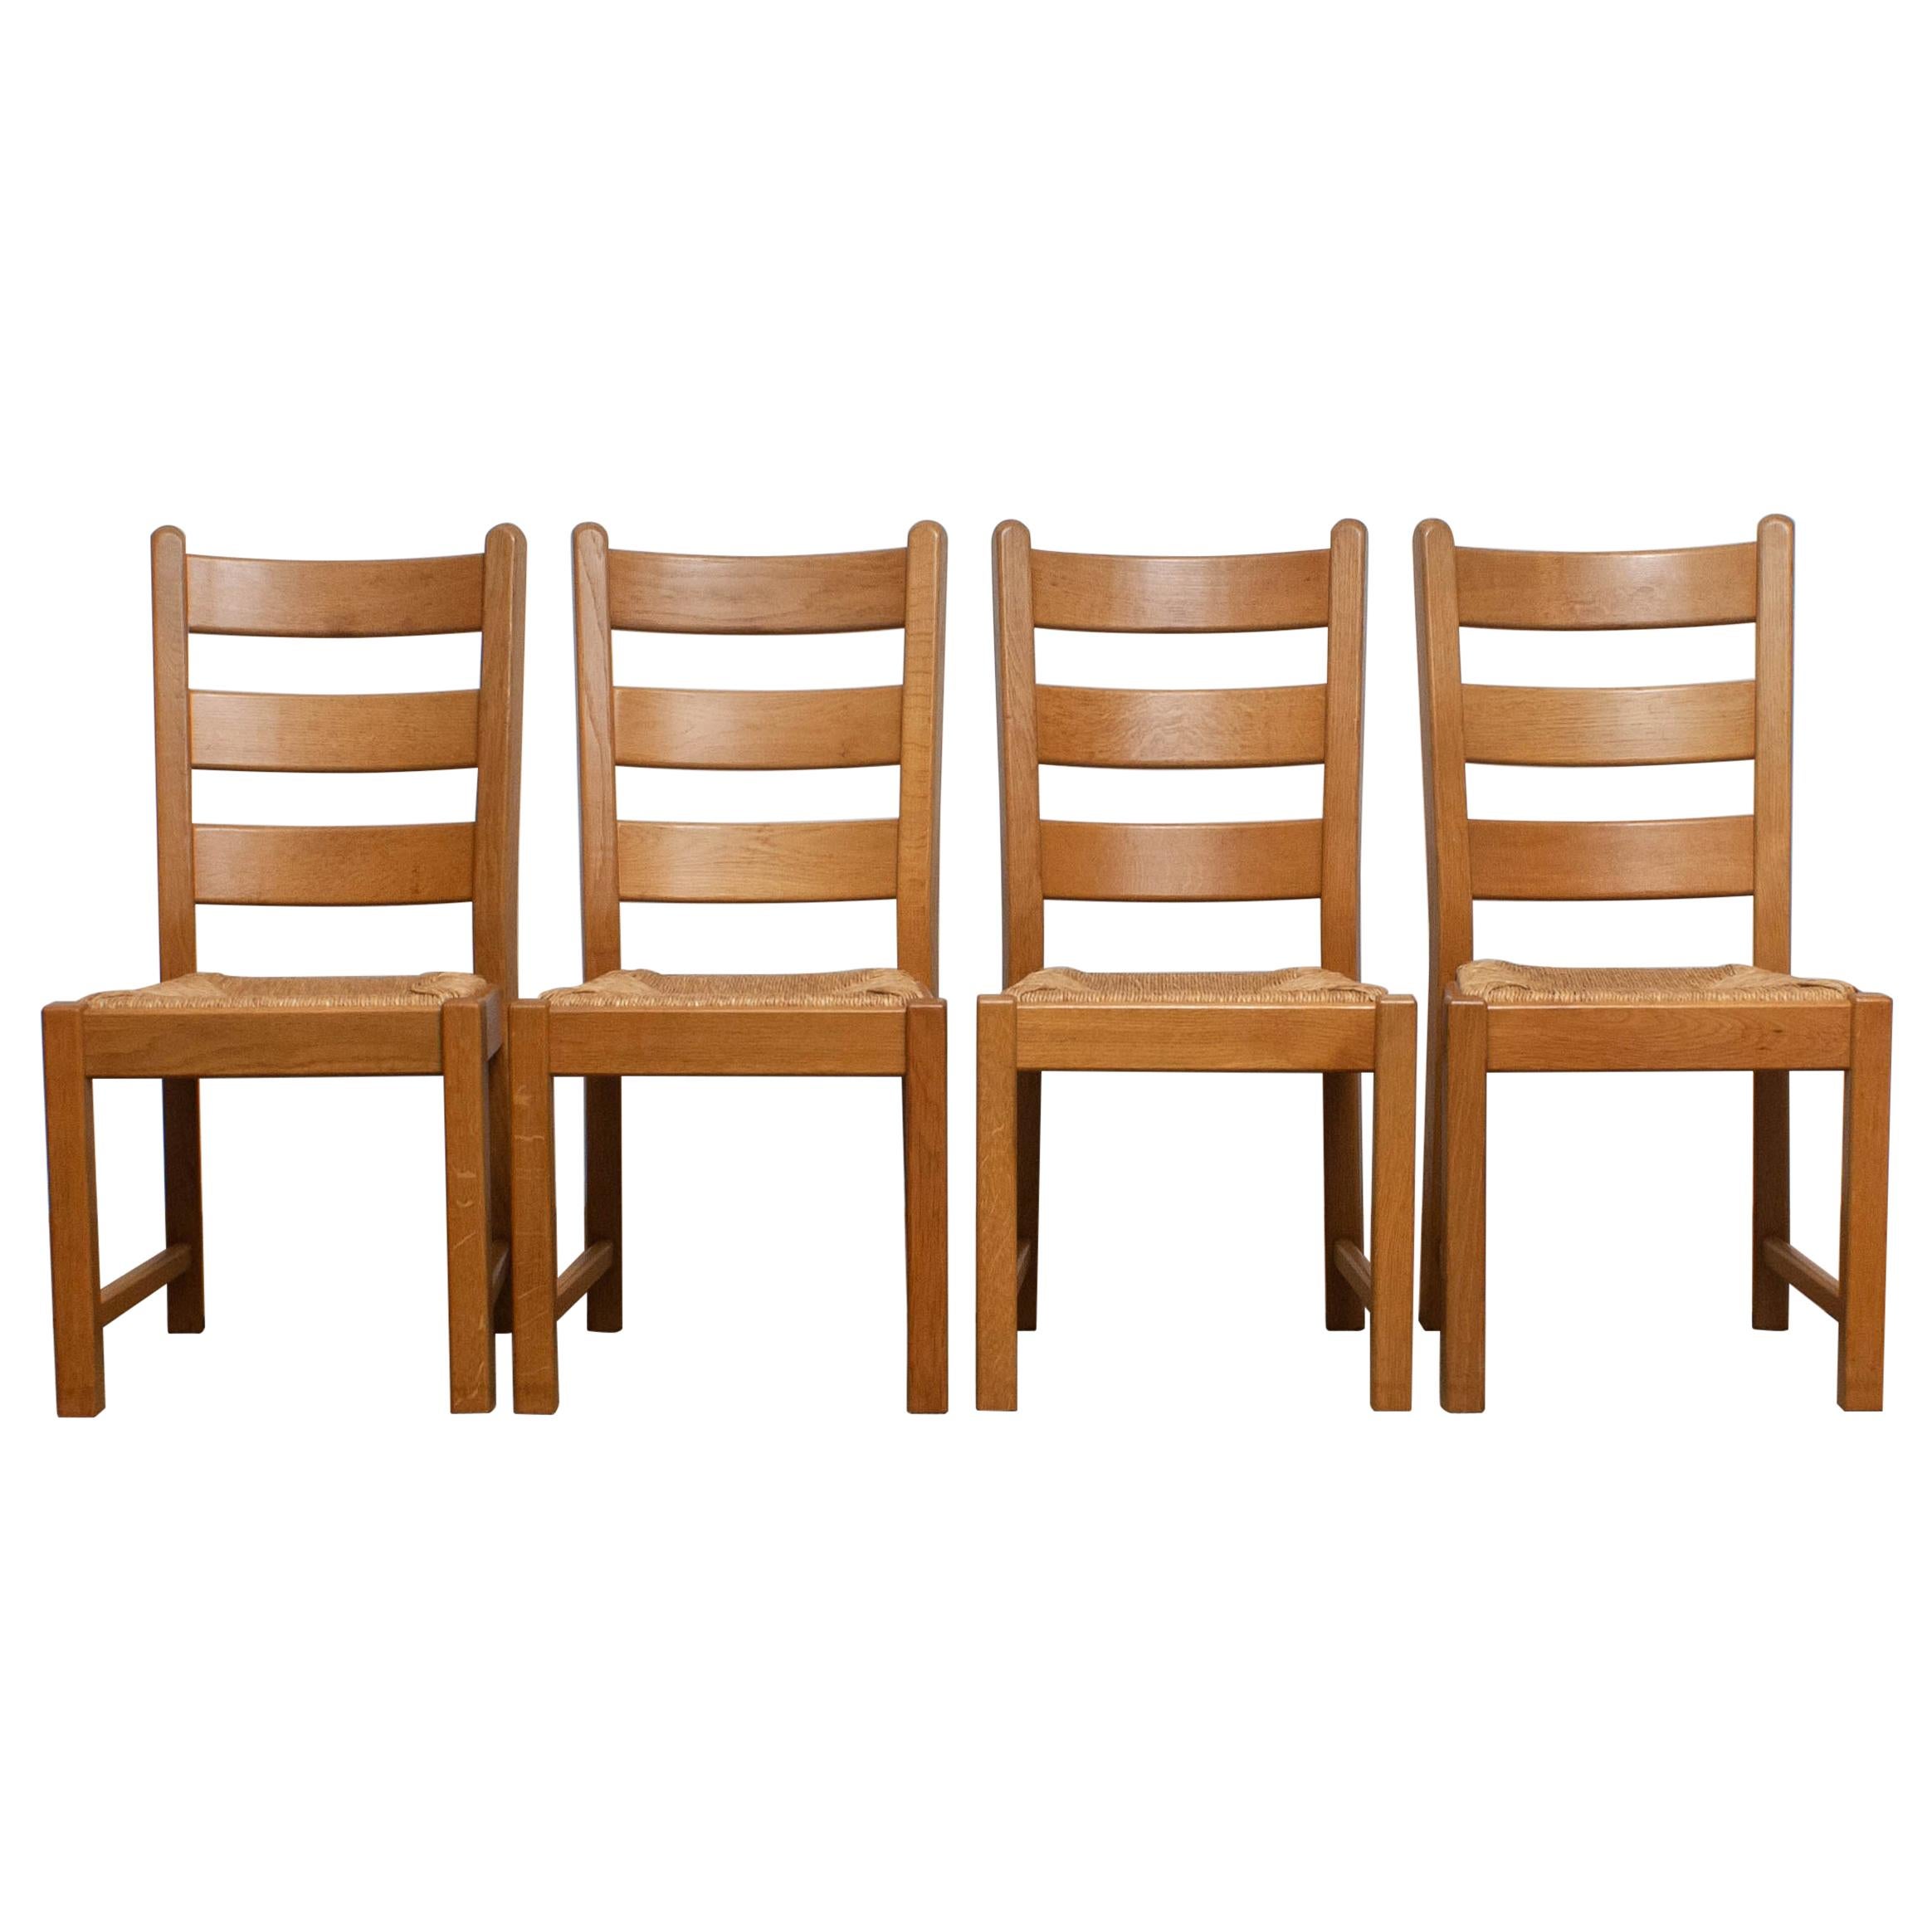 Beautiful set of four Dutch bohemian dining chairs with wicker seats. All four in very good condition.
Period, end of the 1970s.